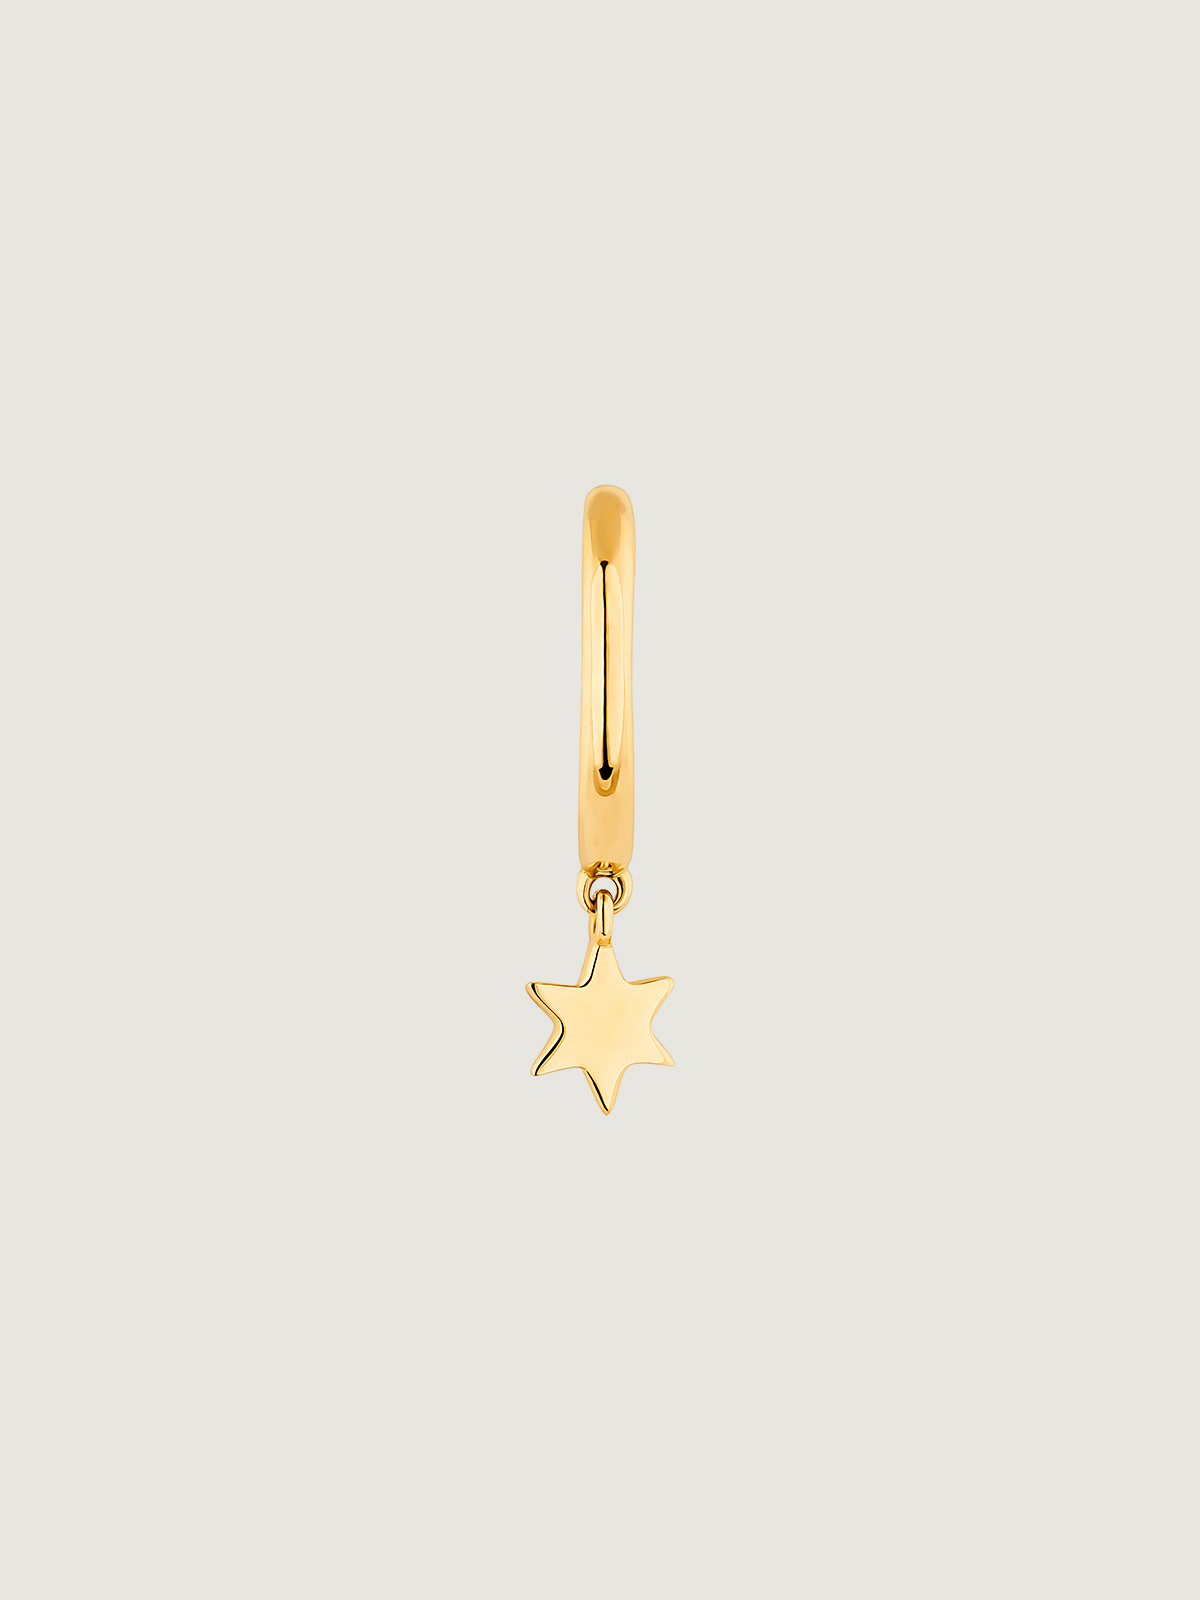 Individual small hoop earring made of 9K yellow gold with a star.